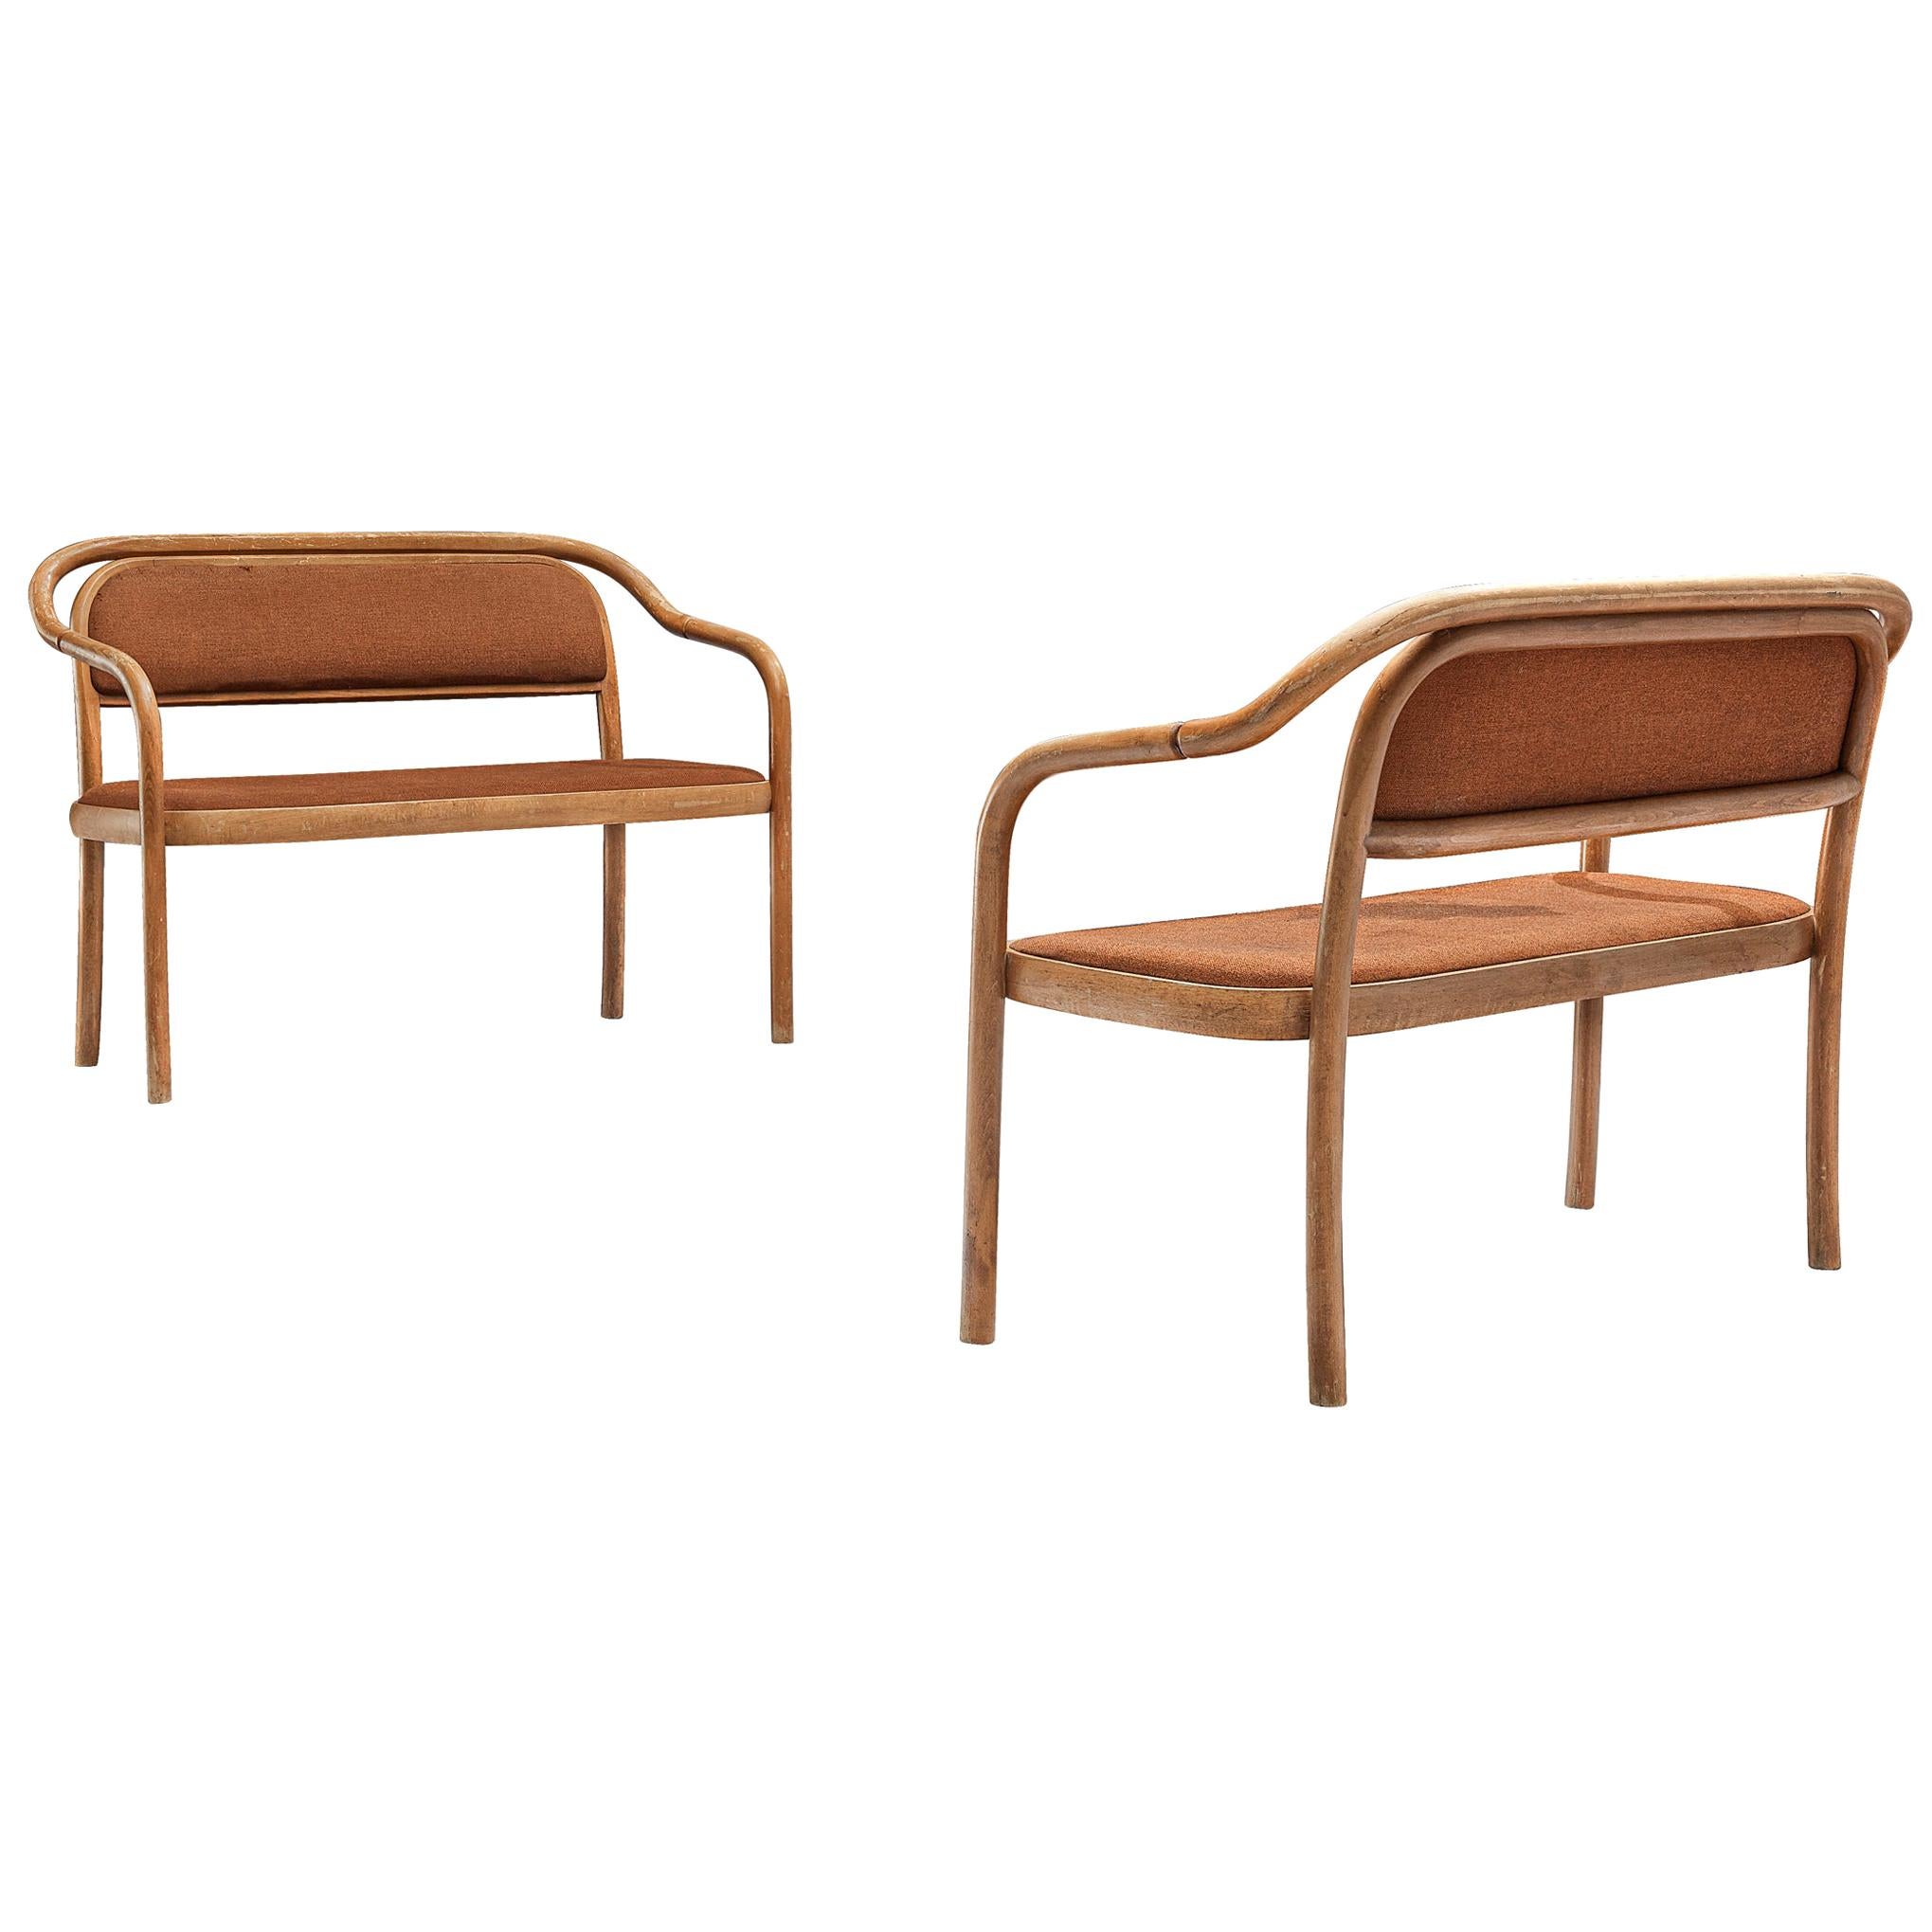 Pair of Benches by Ton in Bentwood